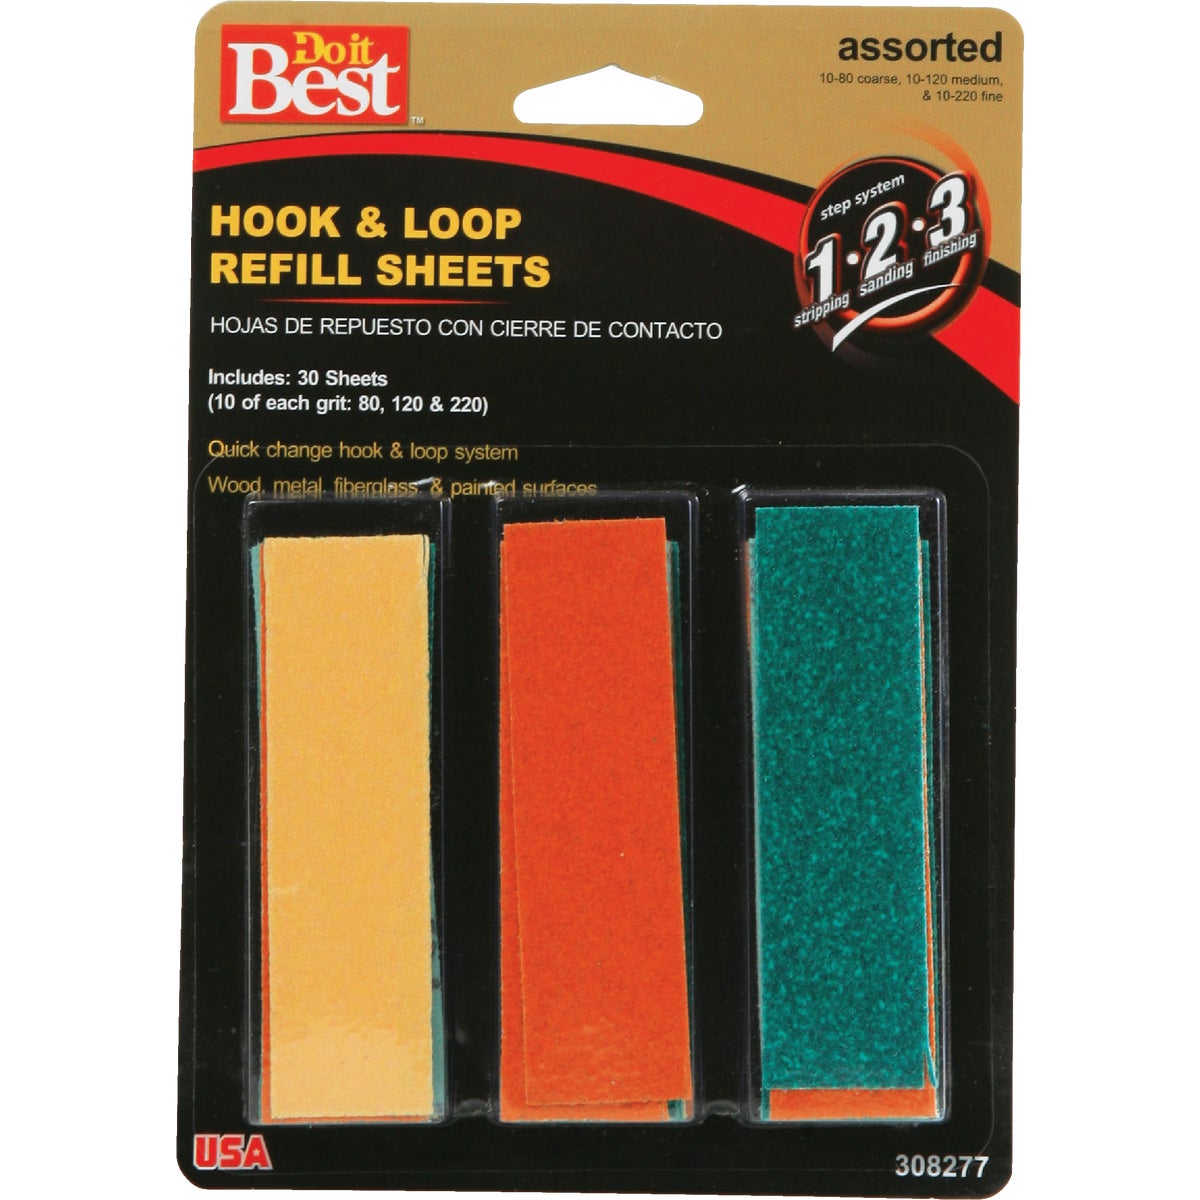 Item 308277, Hook and loop refill sheets.